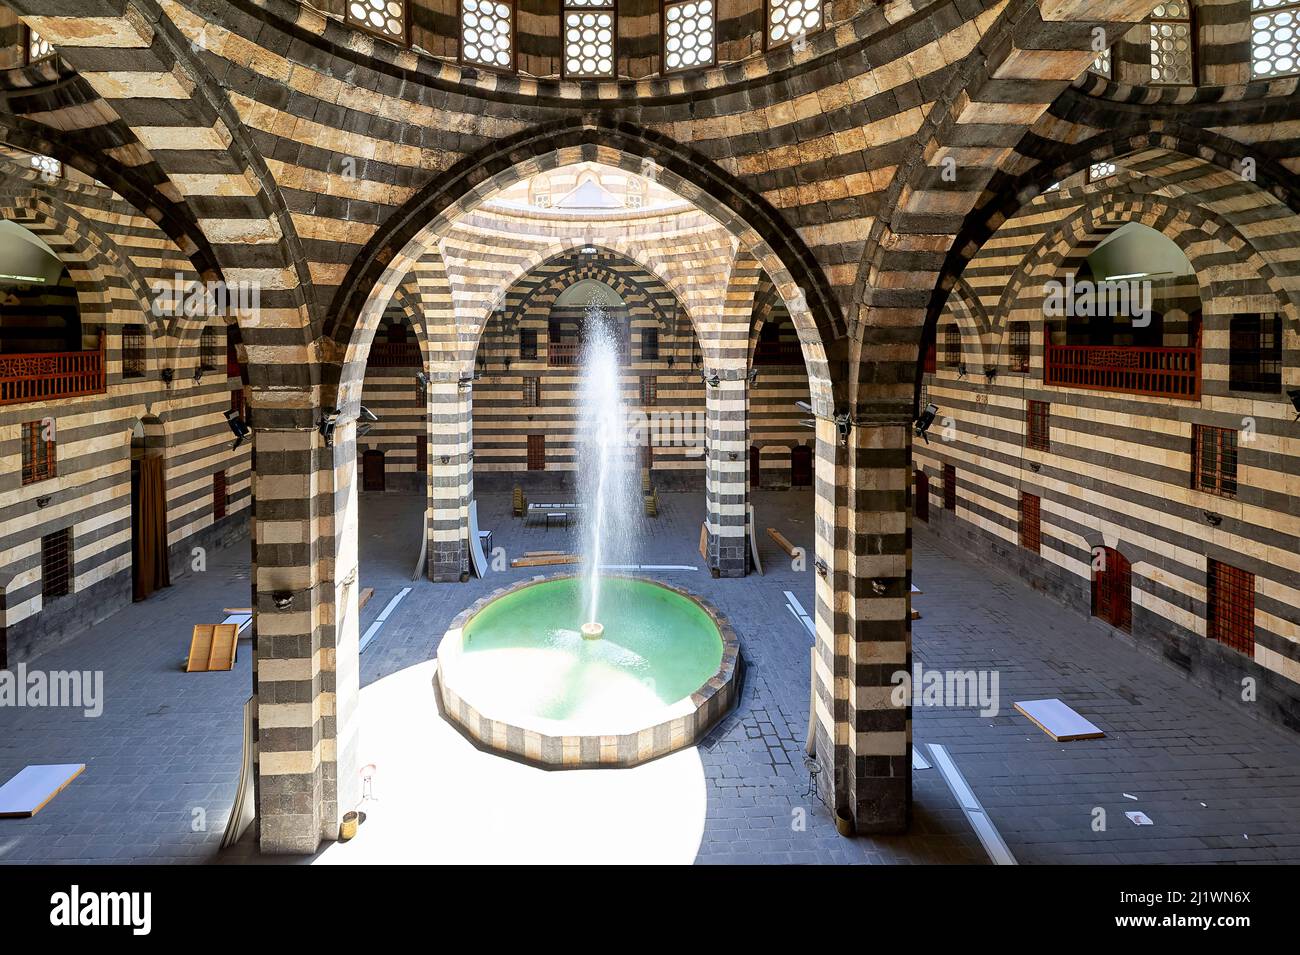 Syria. Khan As'ad Pasha is the largest Caravanserai in the Old City of Damascus Stock Photo